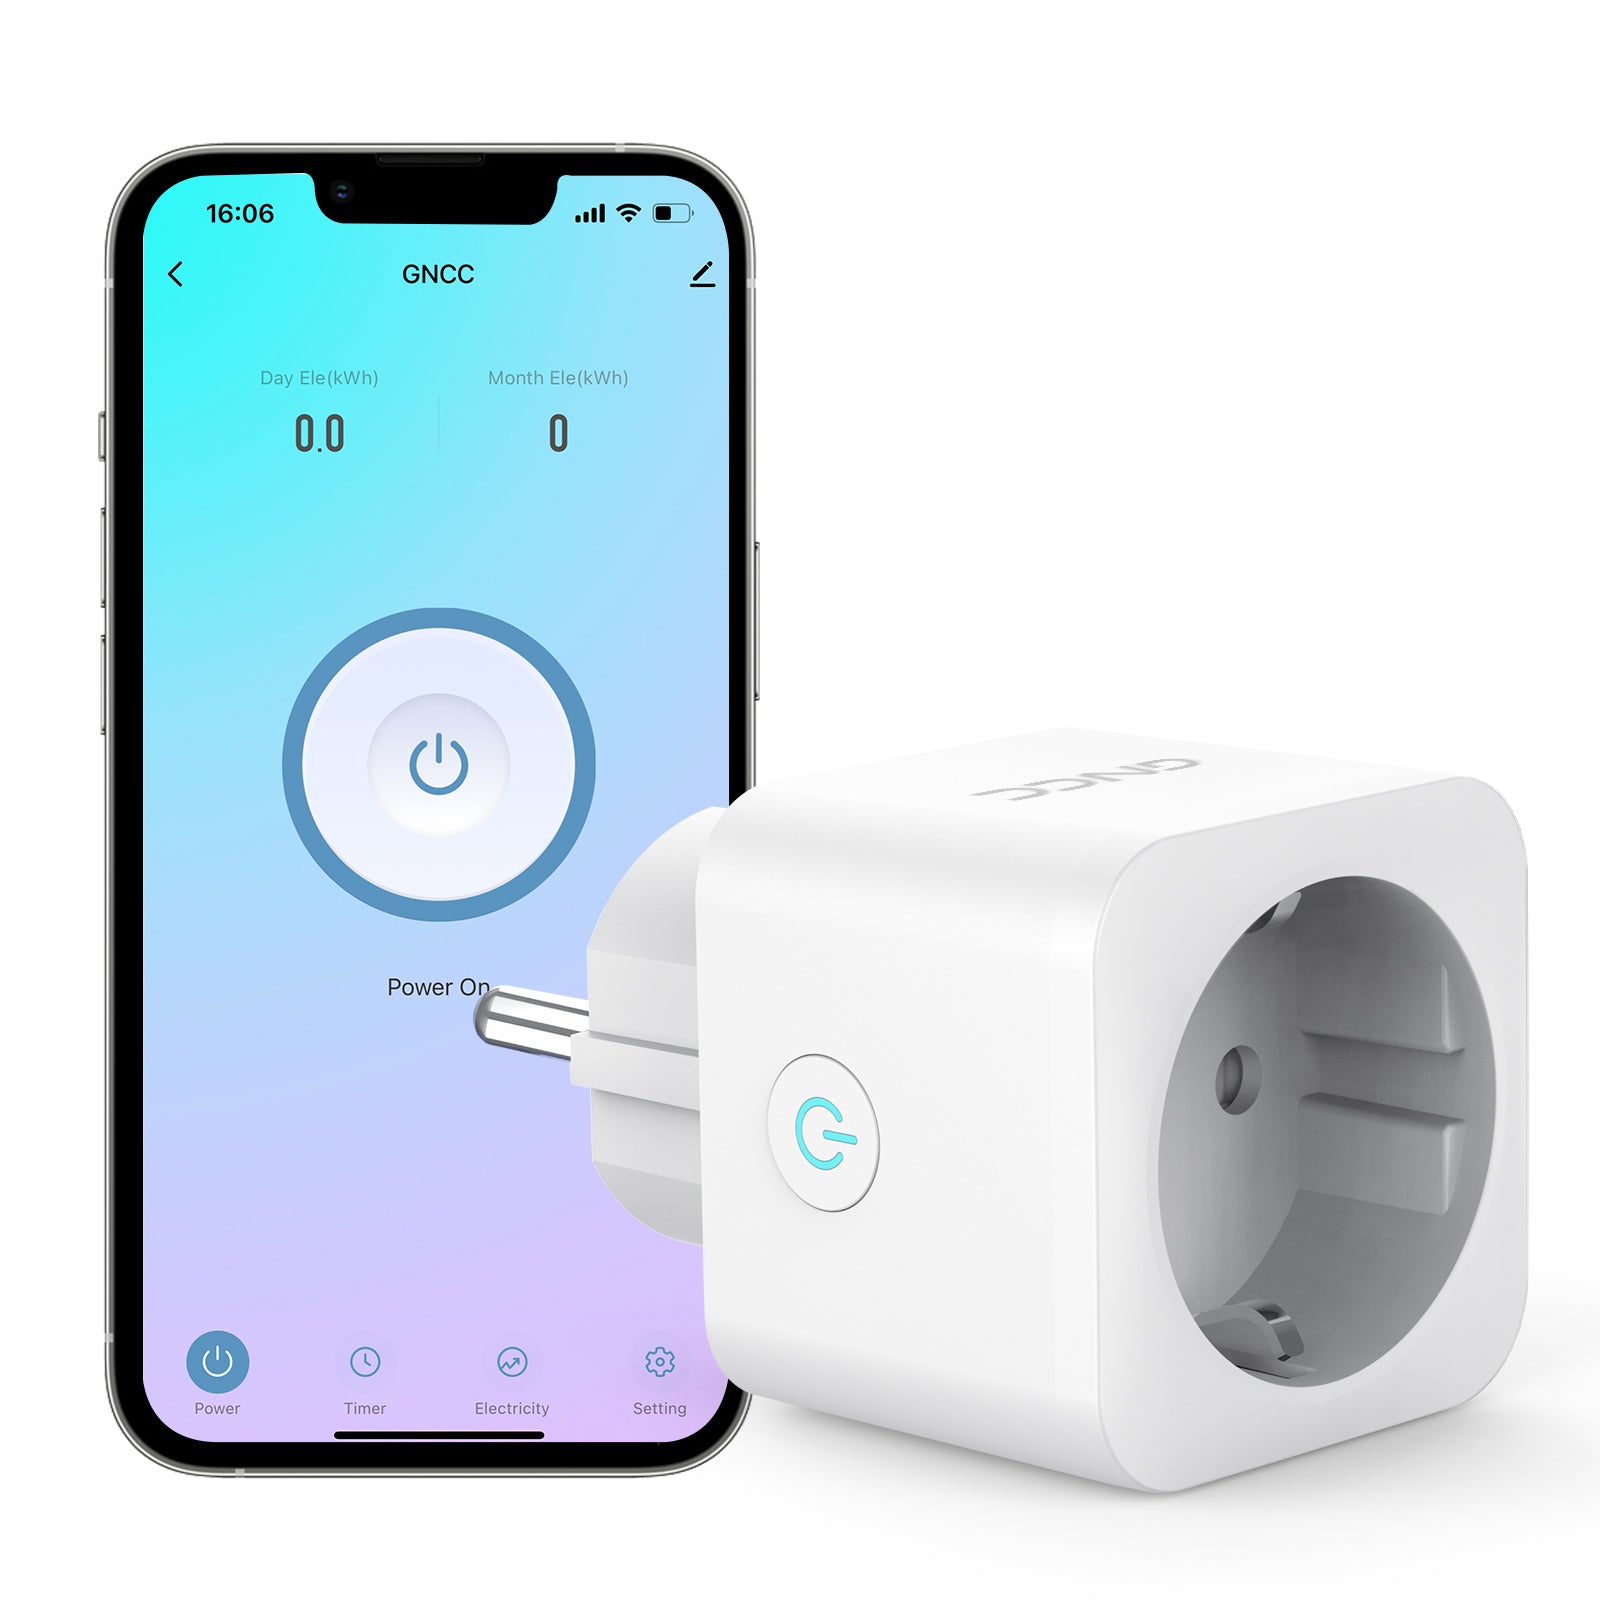 Smart sockets from Teckin. Connect with the Smartlife app and control